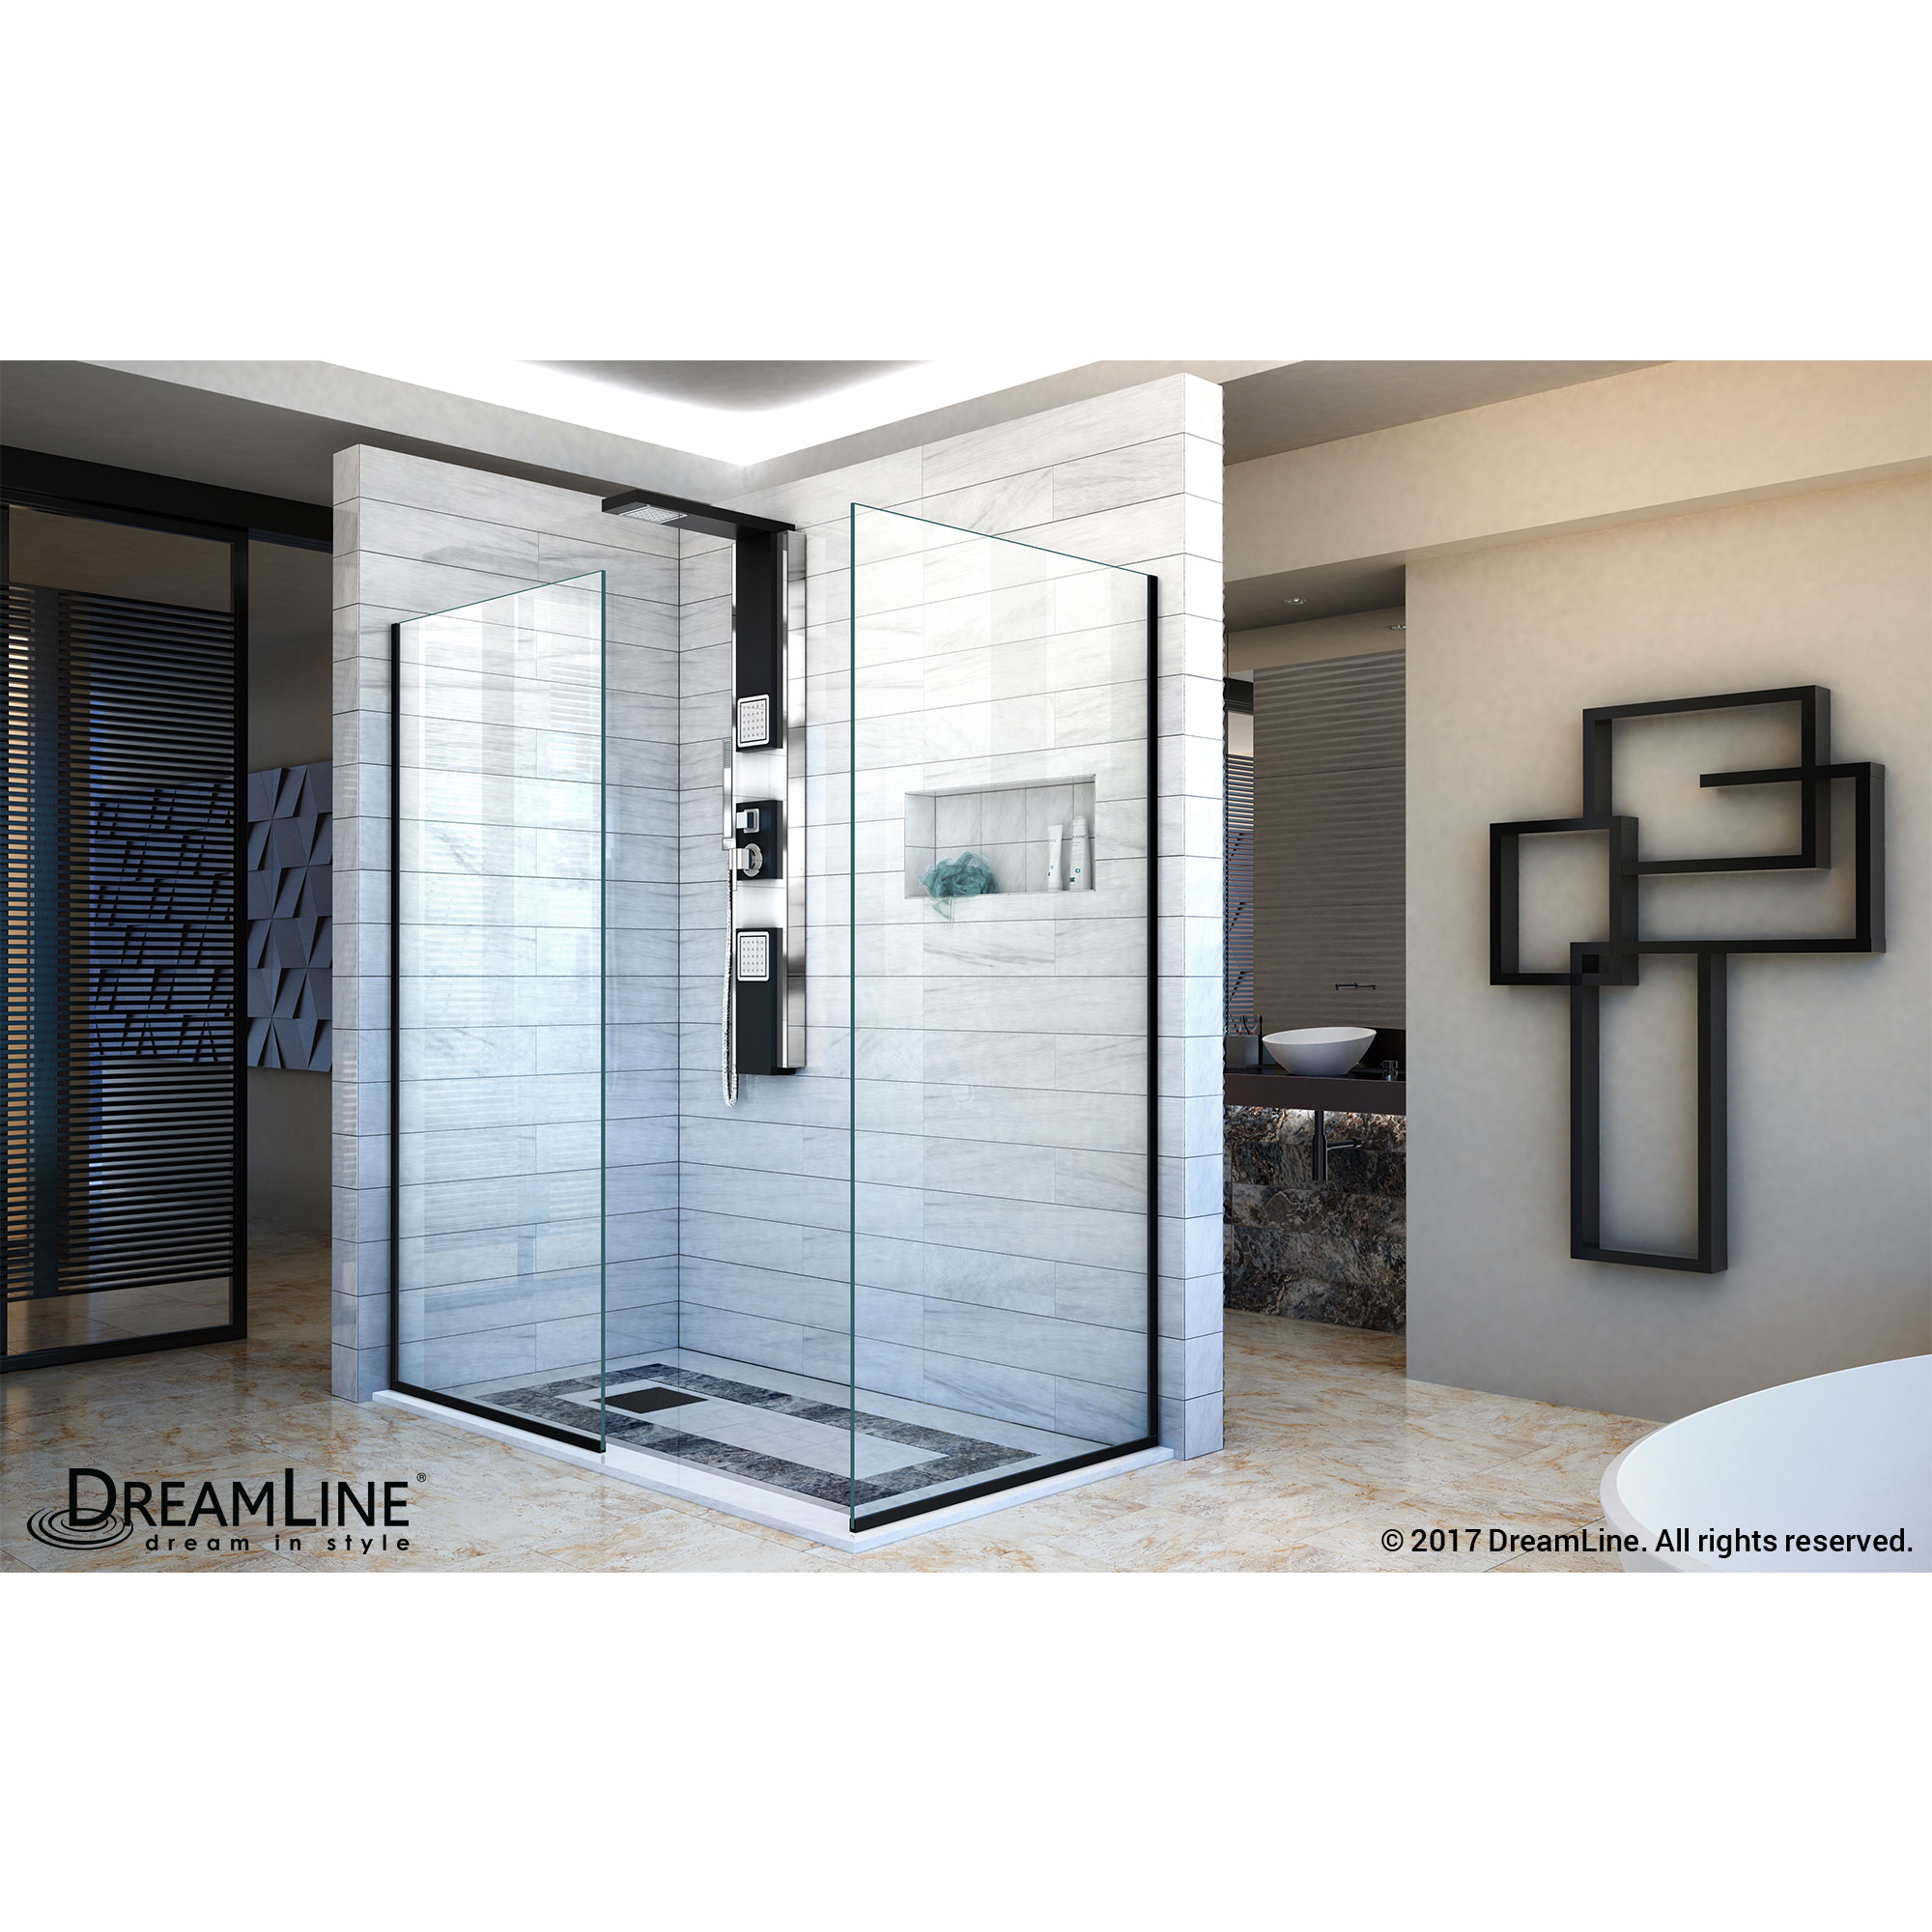 DreamLine Linea Two Individual Frameless Shower Screens 30 in. W x 72 in. H each, Open Entry Design in Satin Black